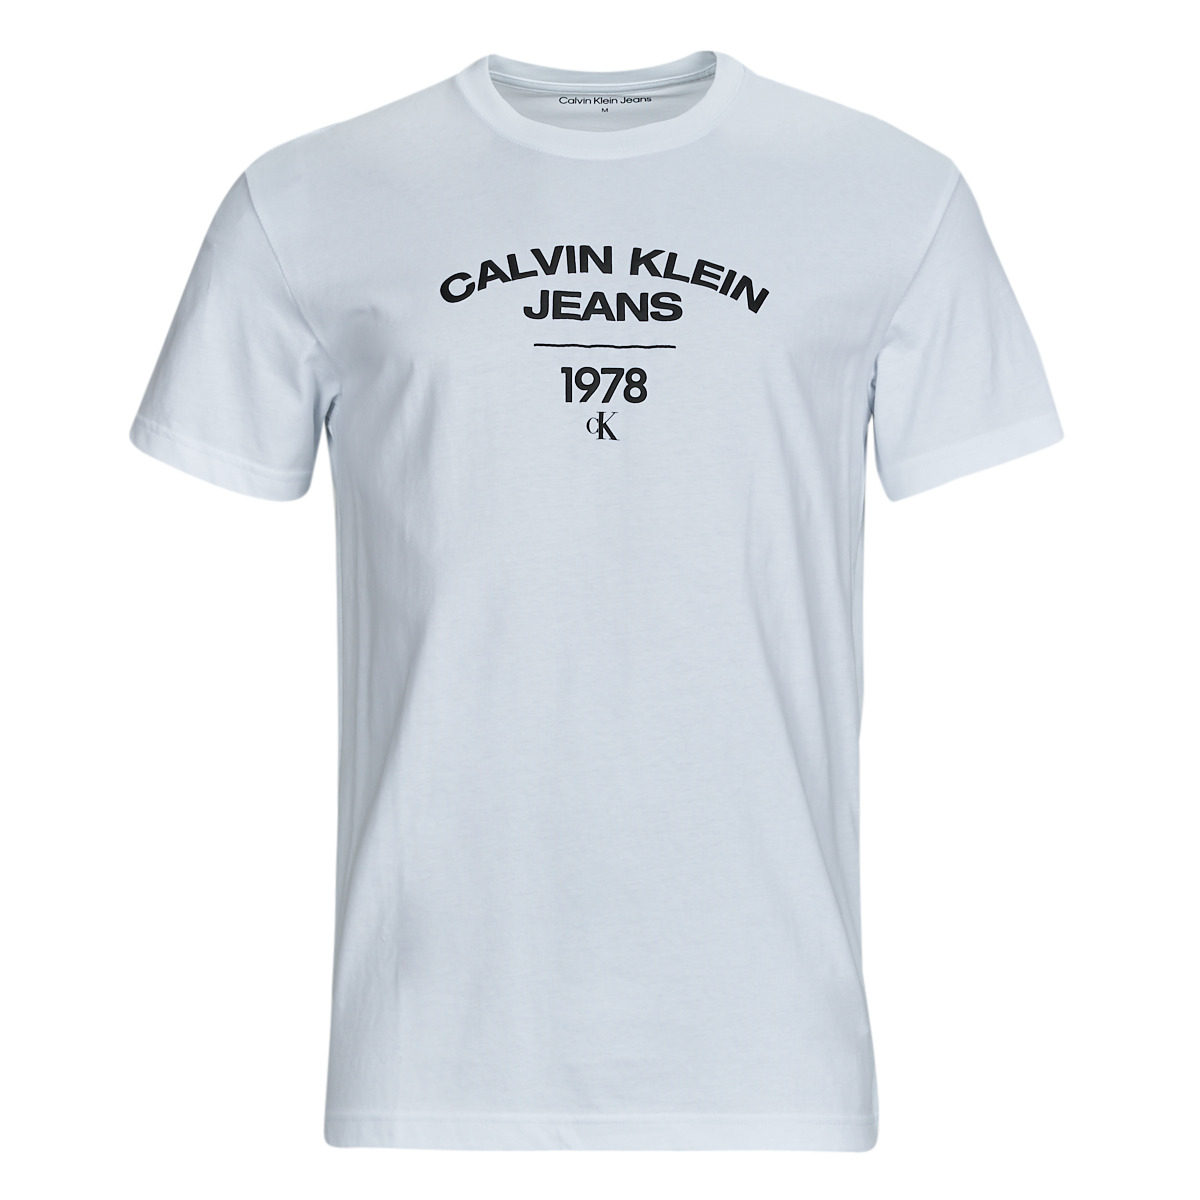 LOGO Men Calvin Klein Free T-SHIRT Spartoo Jeans t-shirts VARSITY delivery | NET - ! short-sleeved - Clothing White CURVE